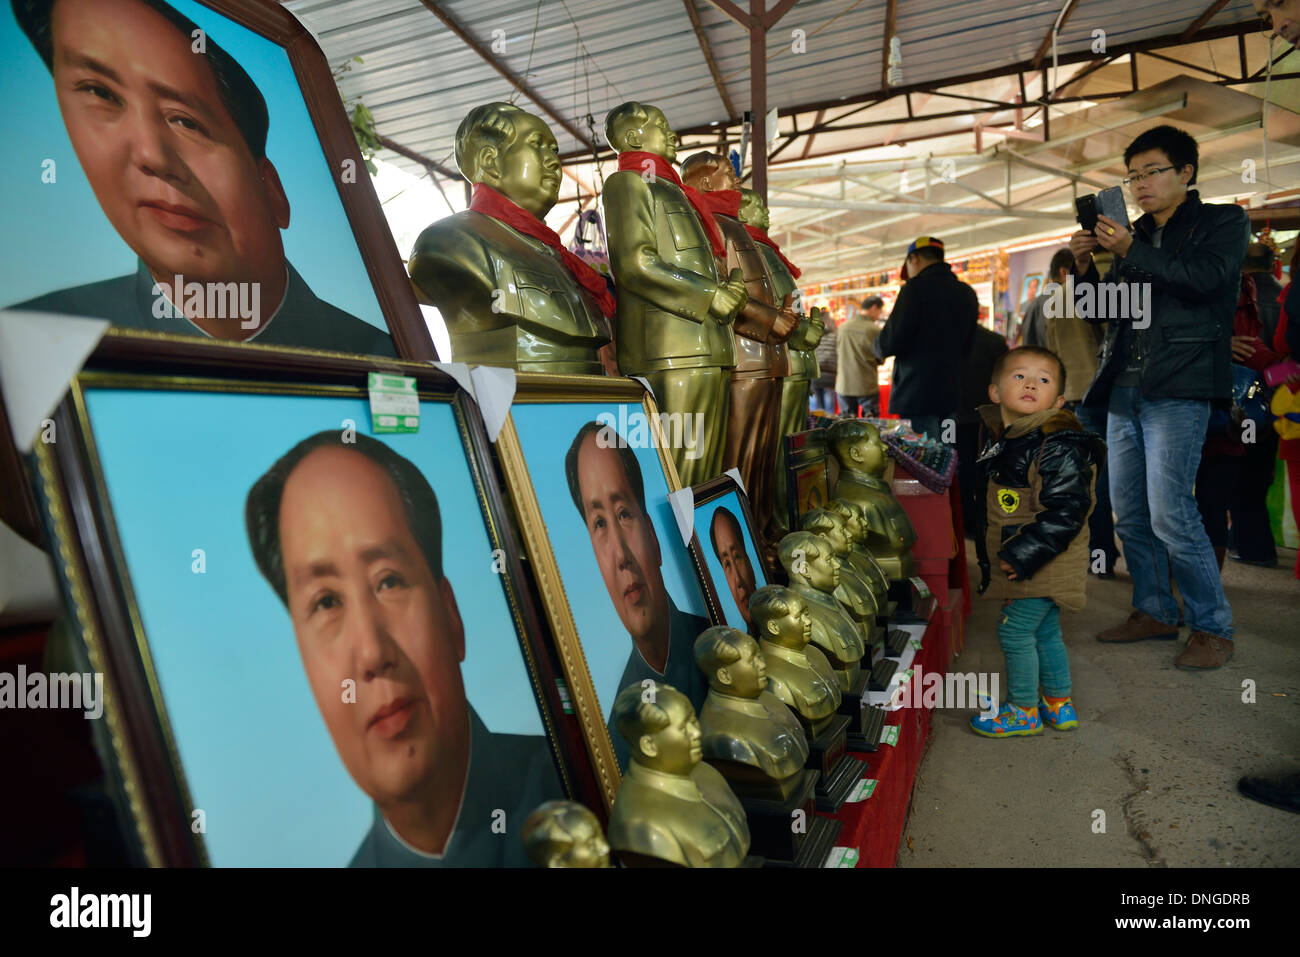 Souvenirs related to Mao Zedong are on sale in Shaoshan, Mao's birthplace, Hunan province, China. 06-Dec-2013 Stock Photo